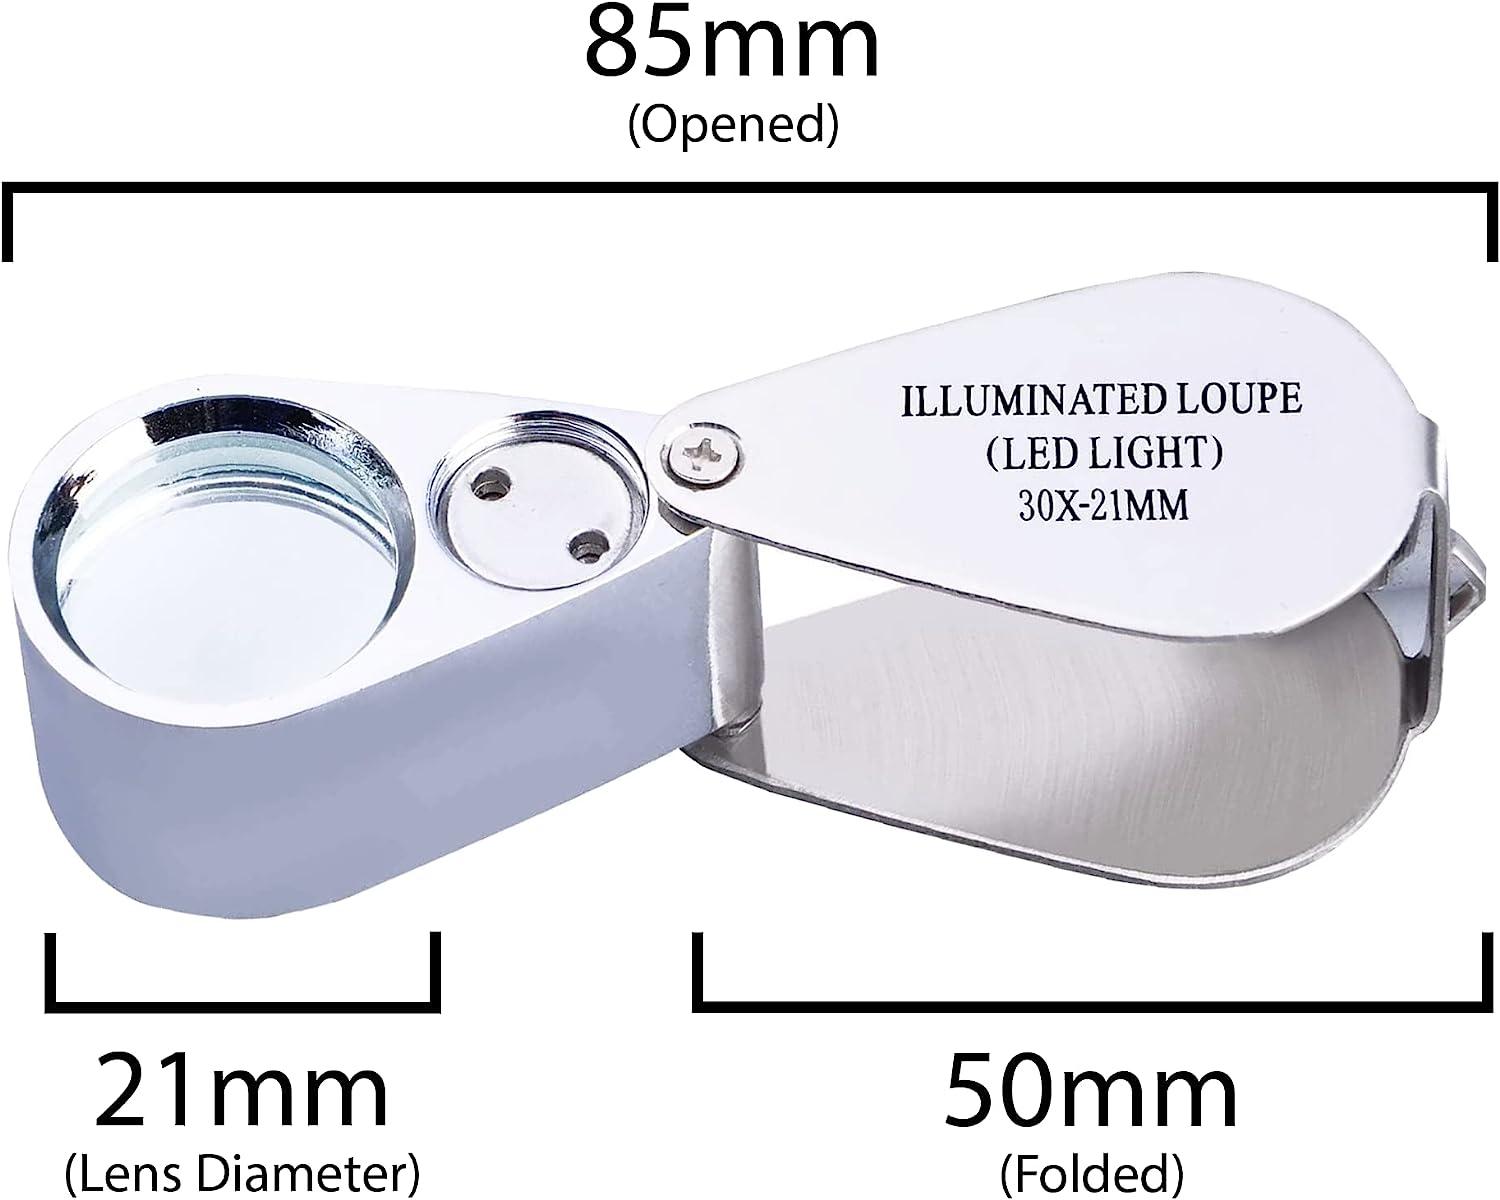 Pineapple [2 Pack] 30X Jewelers Loupe Magnifier, Folding Pocket Magnifying  Glass